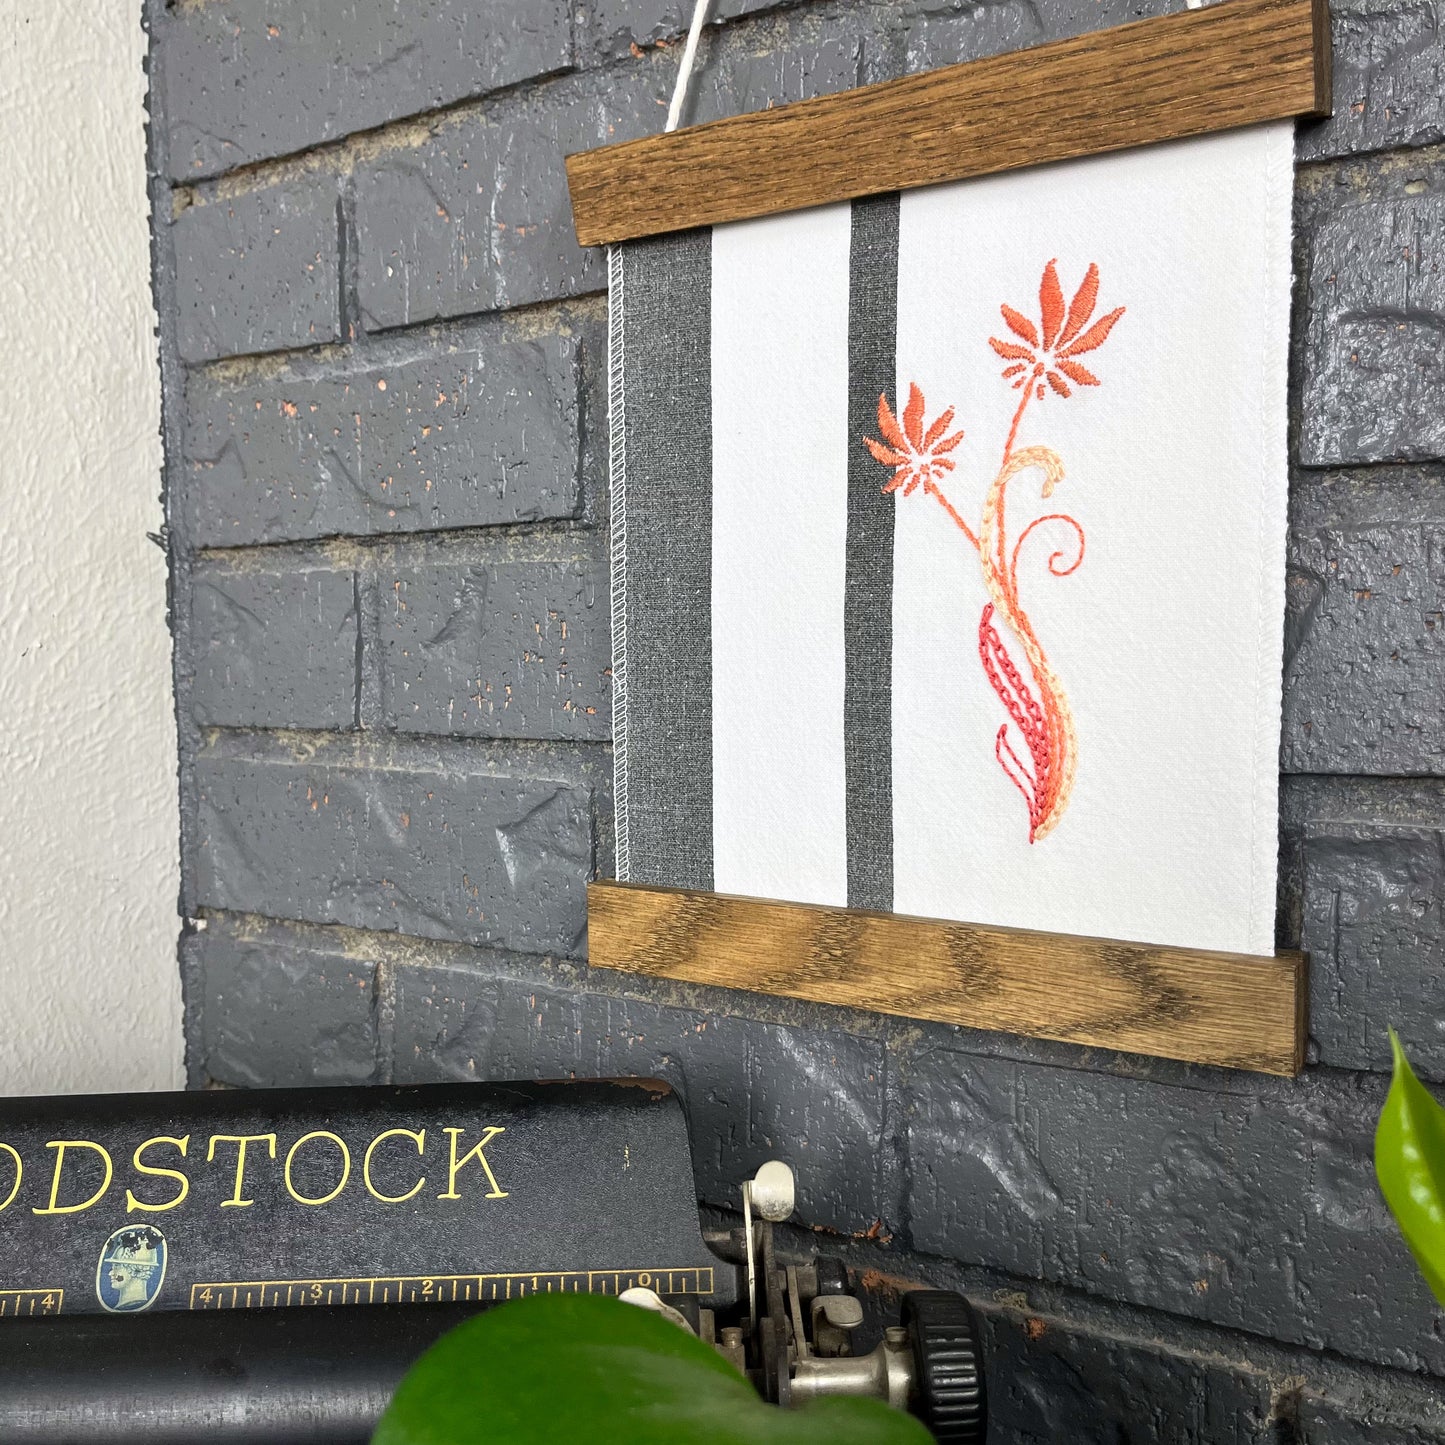 a fabric wall hanging in a wood magnetic frame on a grey wall, made out of white fabric with black vertical stripes, hand stitched with coral flowers with long curvy stems, a typewriter and pothos plant peek out at the bottom of the frame